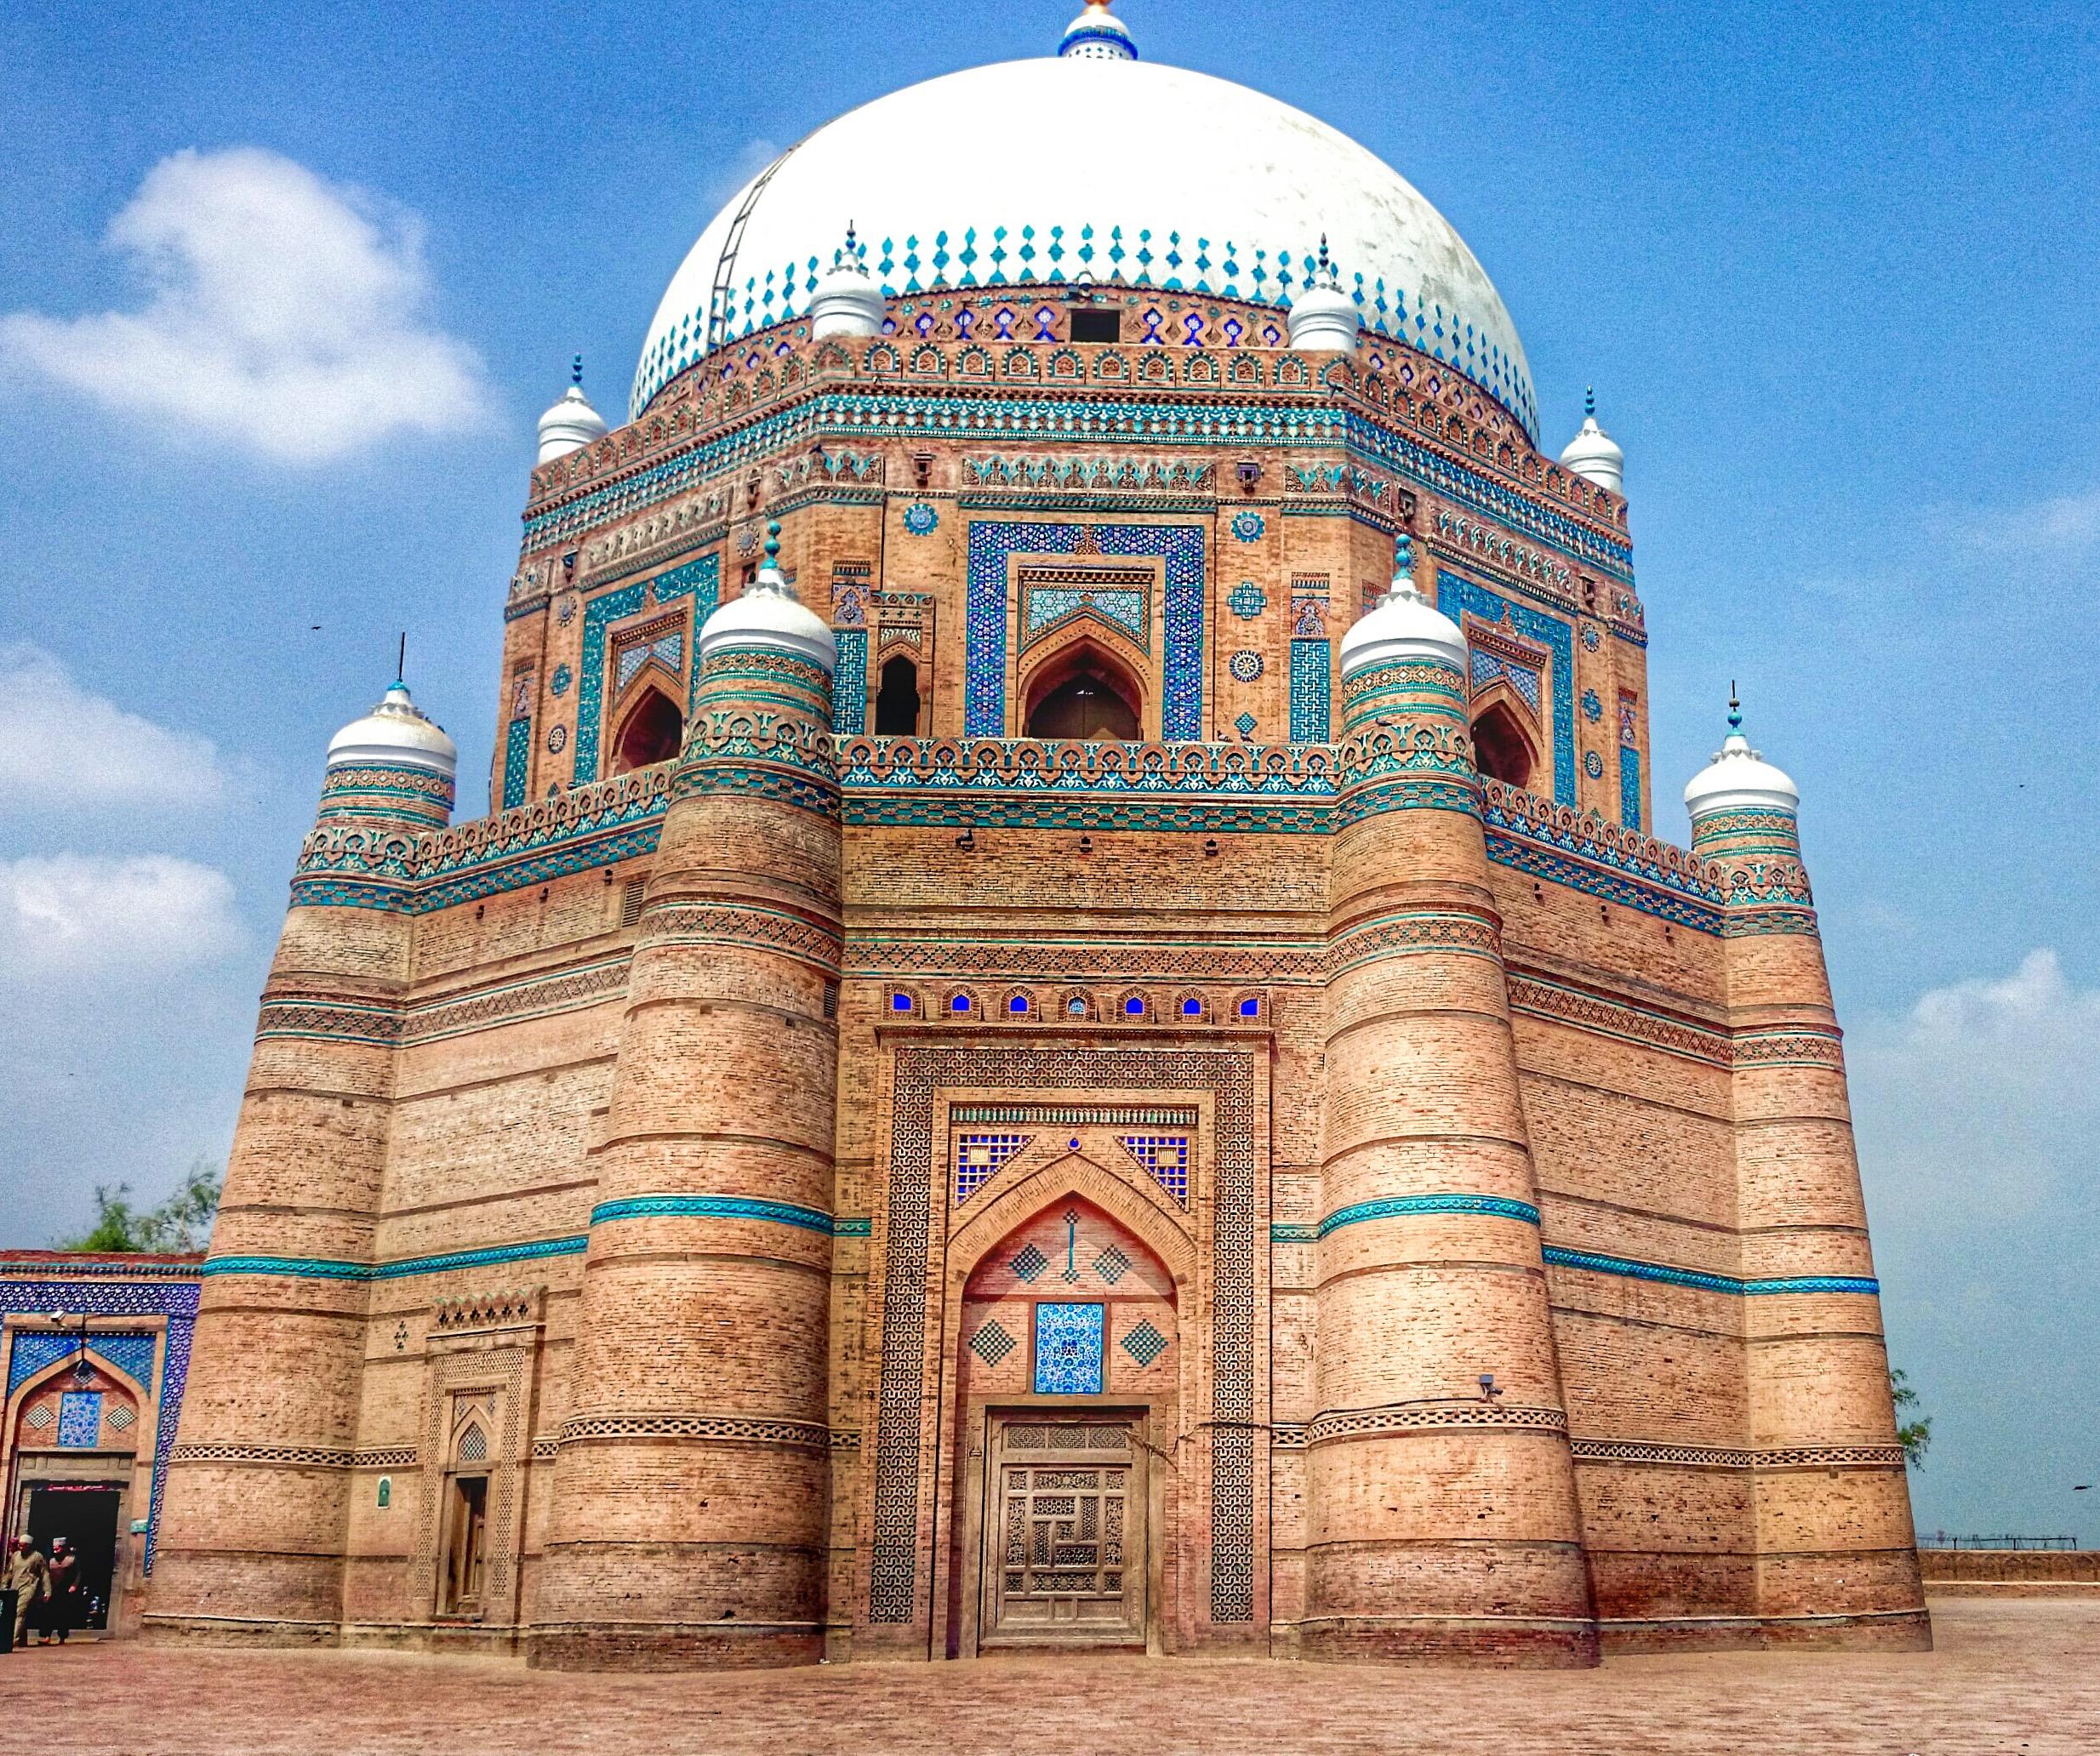 Delhi Sultanate Architecture: A Blend of Indian and Islamic Styles